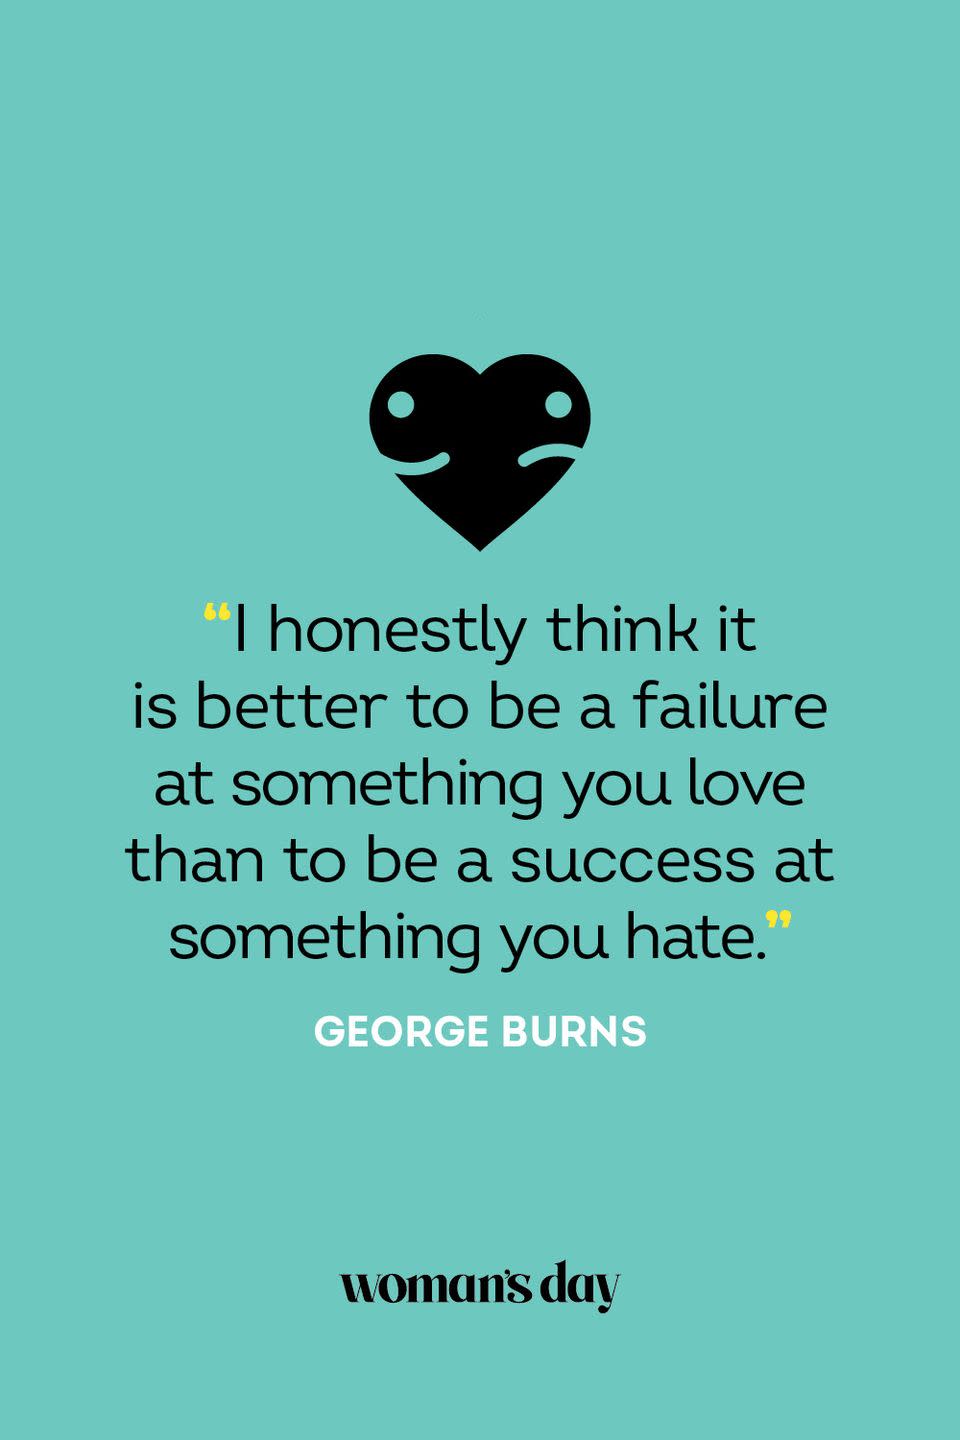 <p>"I honestly think it is better to be a failure at something you love than to be a success at something you hate."</p>